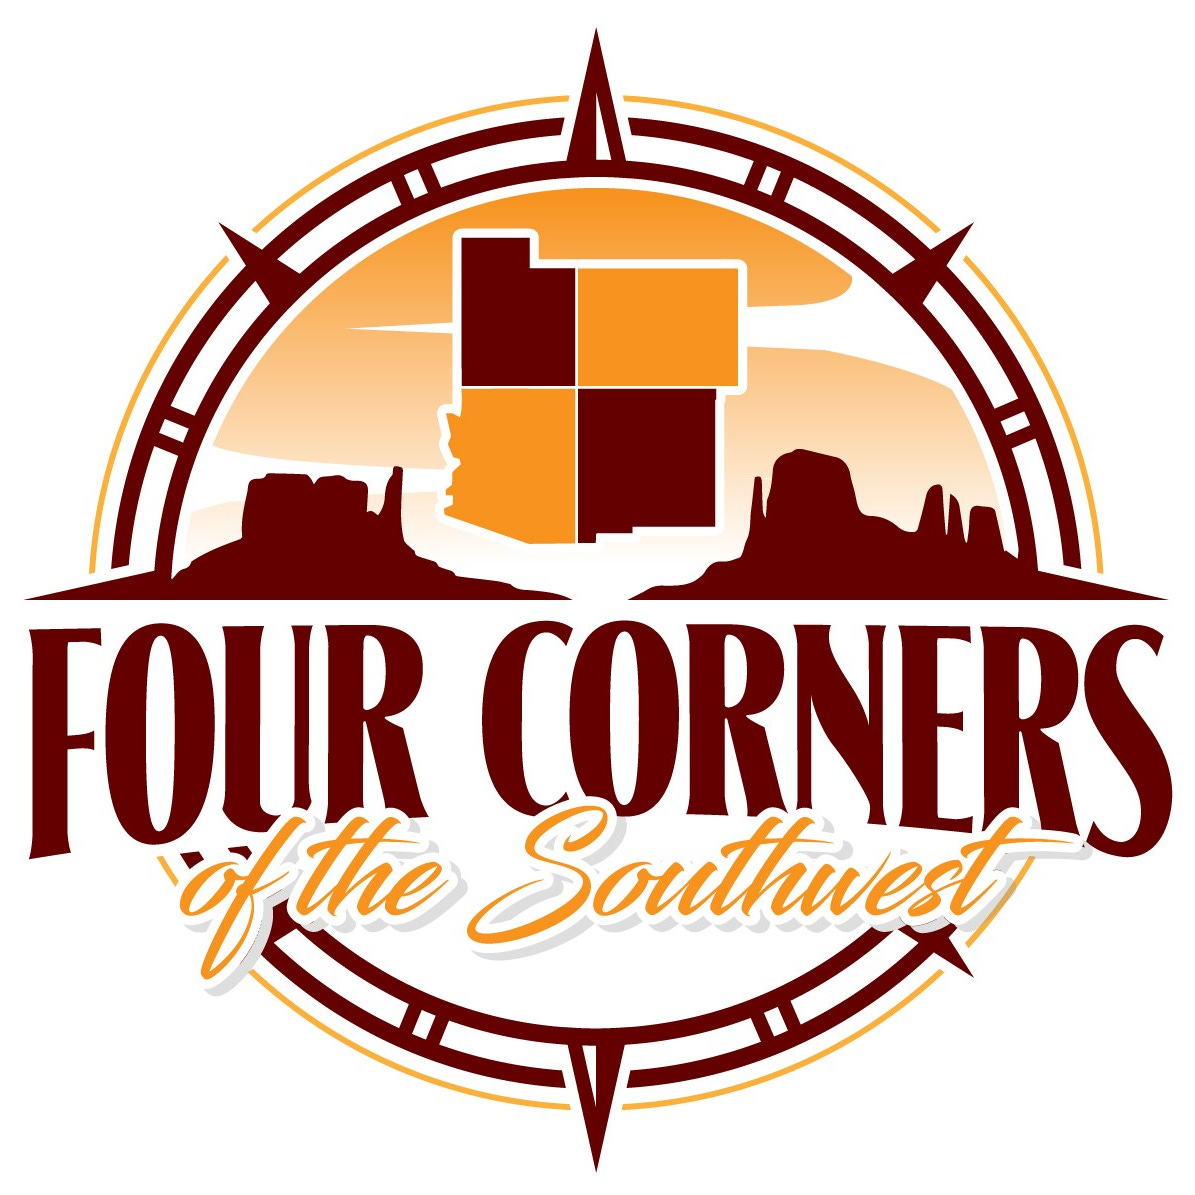 Artwork for Four Corners of the Southwest